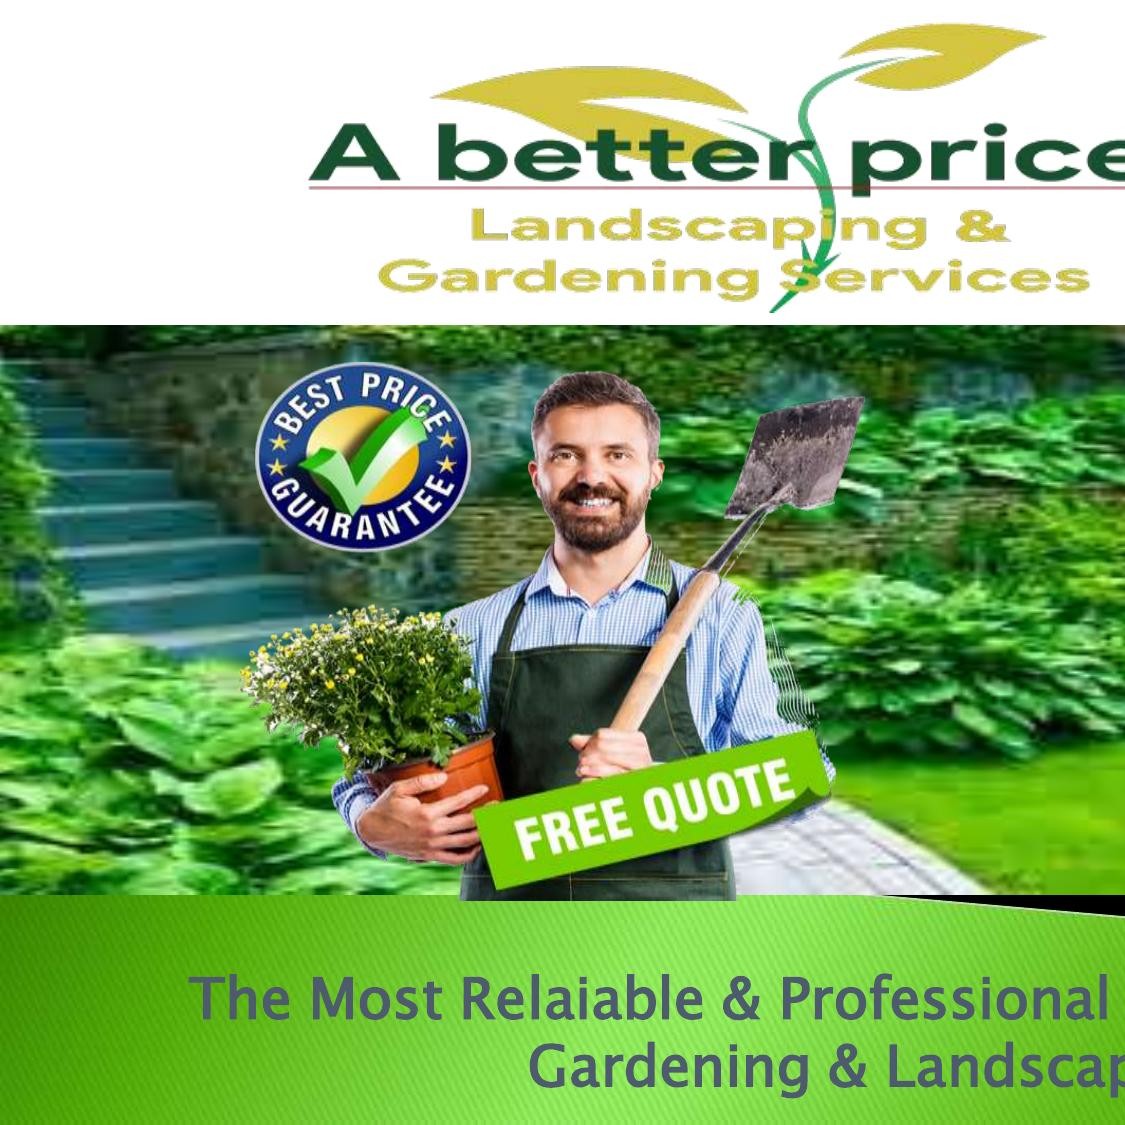 A Better Gardening Landscaping, Gardening And Landscaping Services